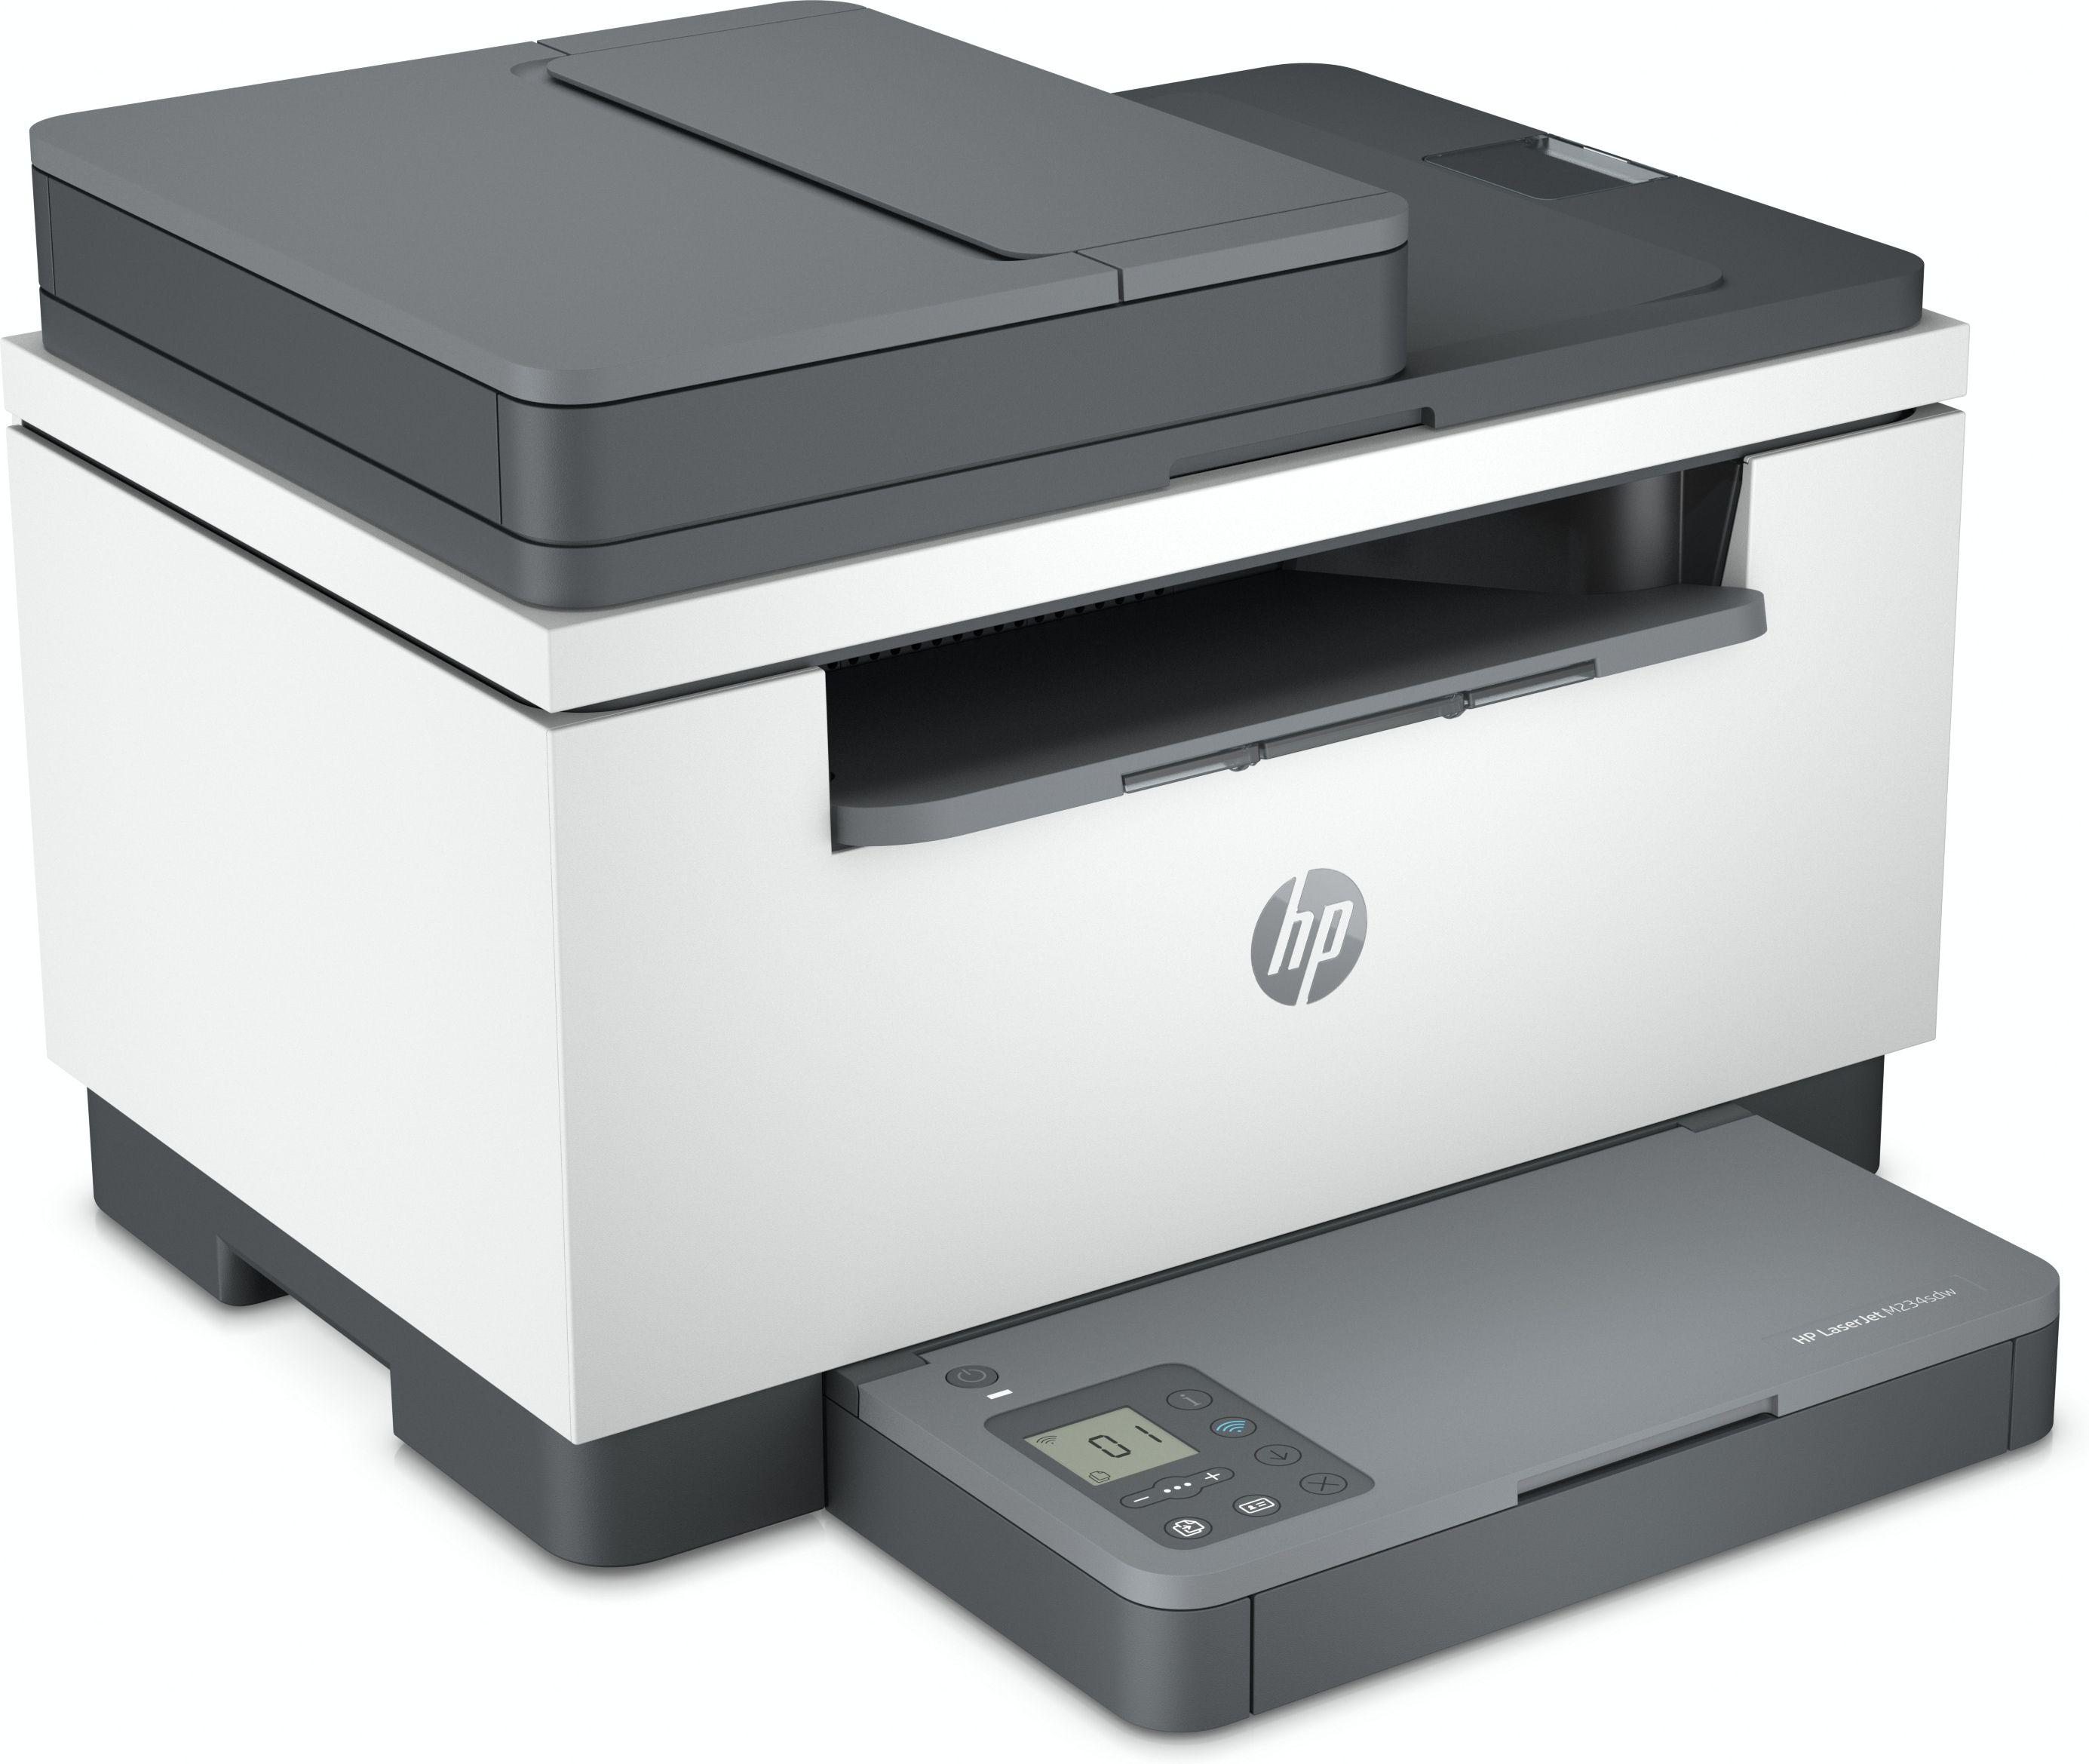 HP LaserJet MFP M234sdw Printer, Black and white, Printer for Small office, Print, copy, scan, Two-sided printing; Scan to email; Scan to PDF_4